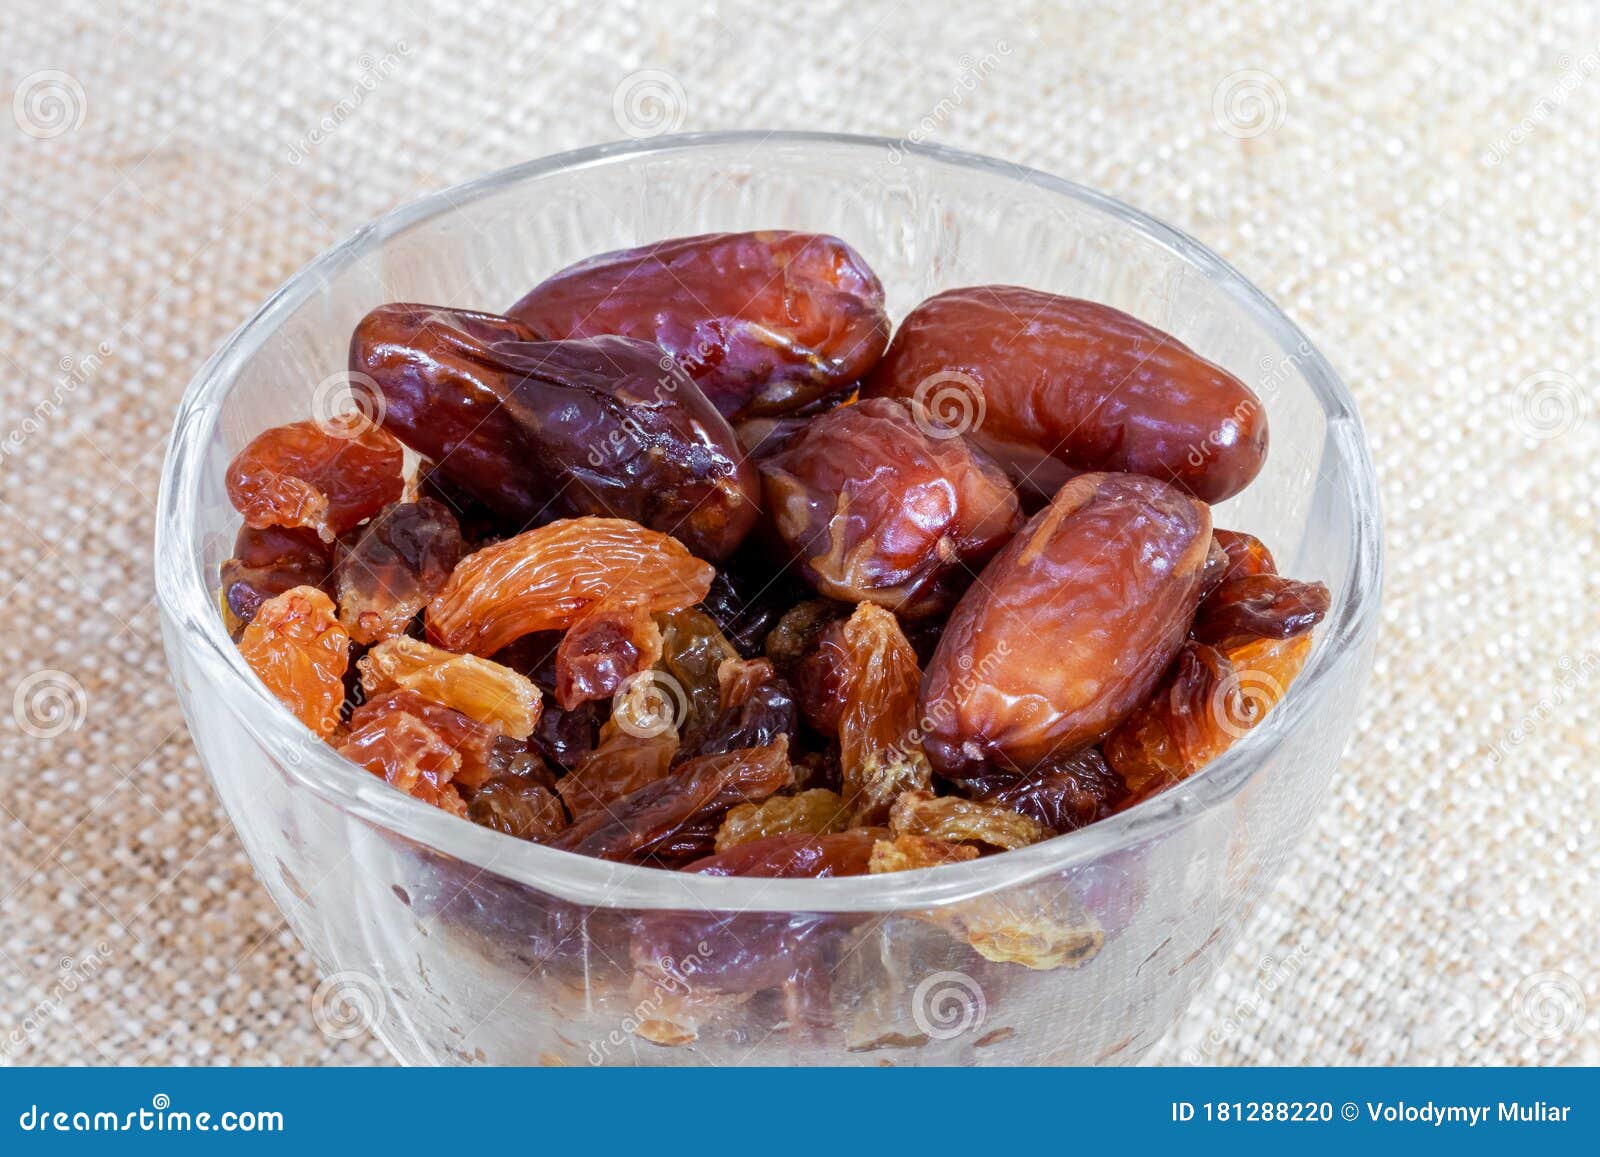 Dates and Raisins in a Transparent Plate on Burlap Stock Photo - Image ...